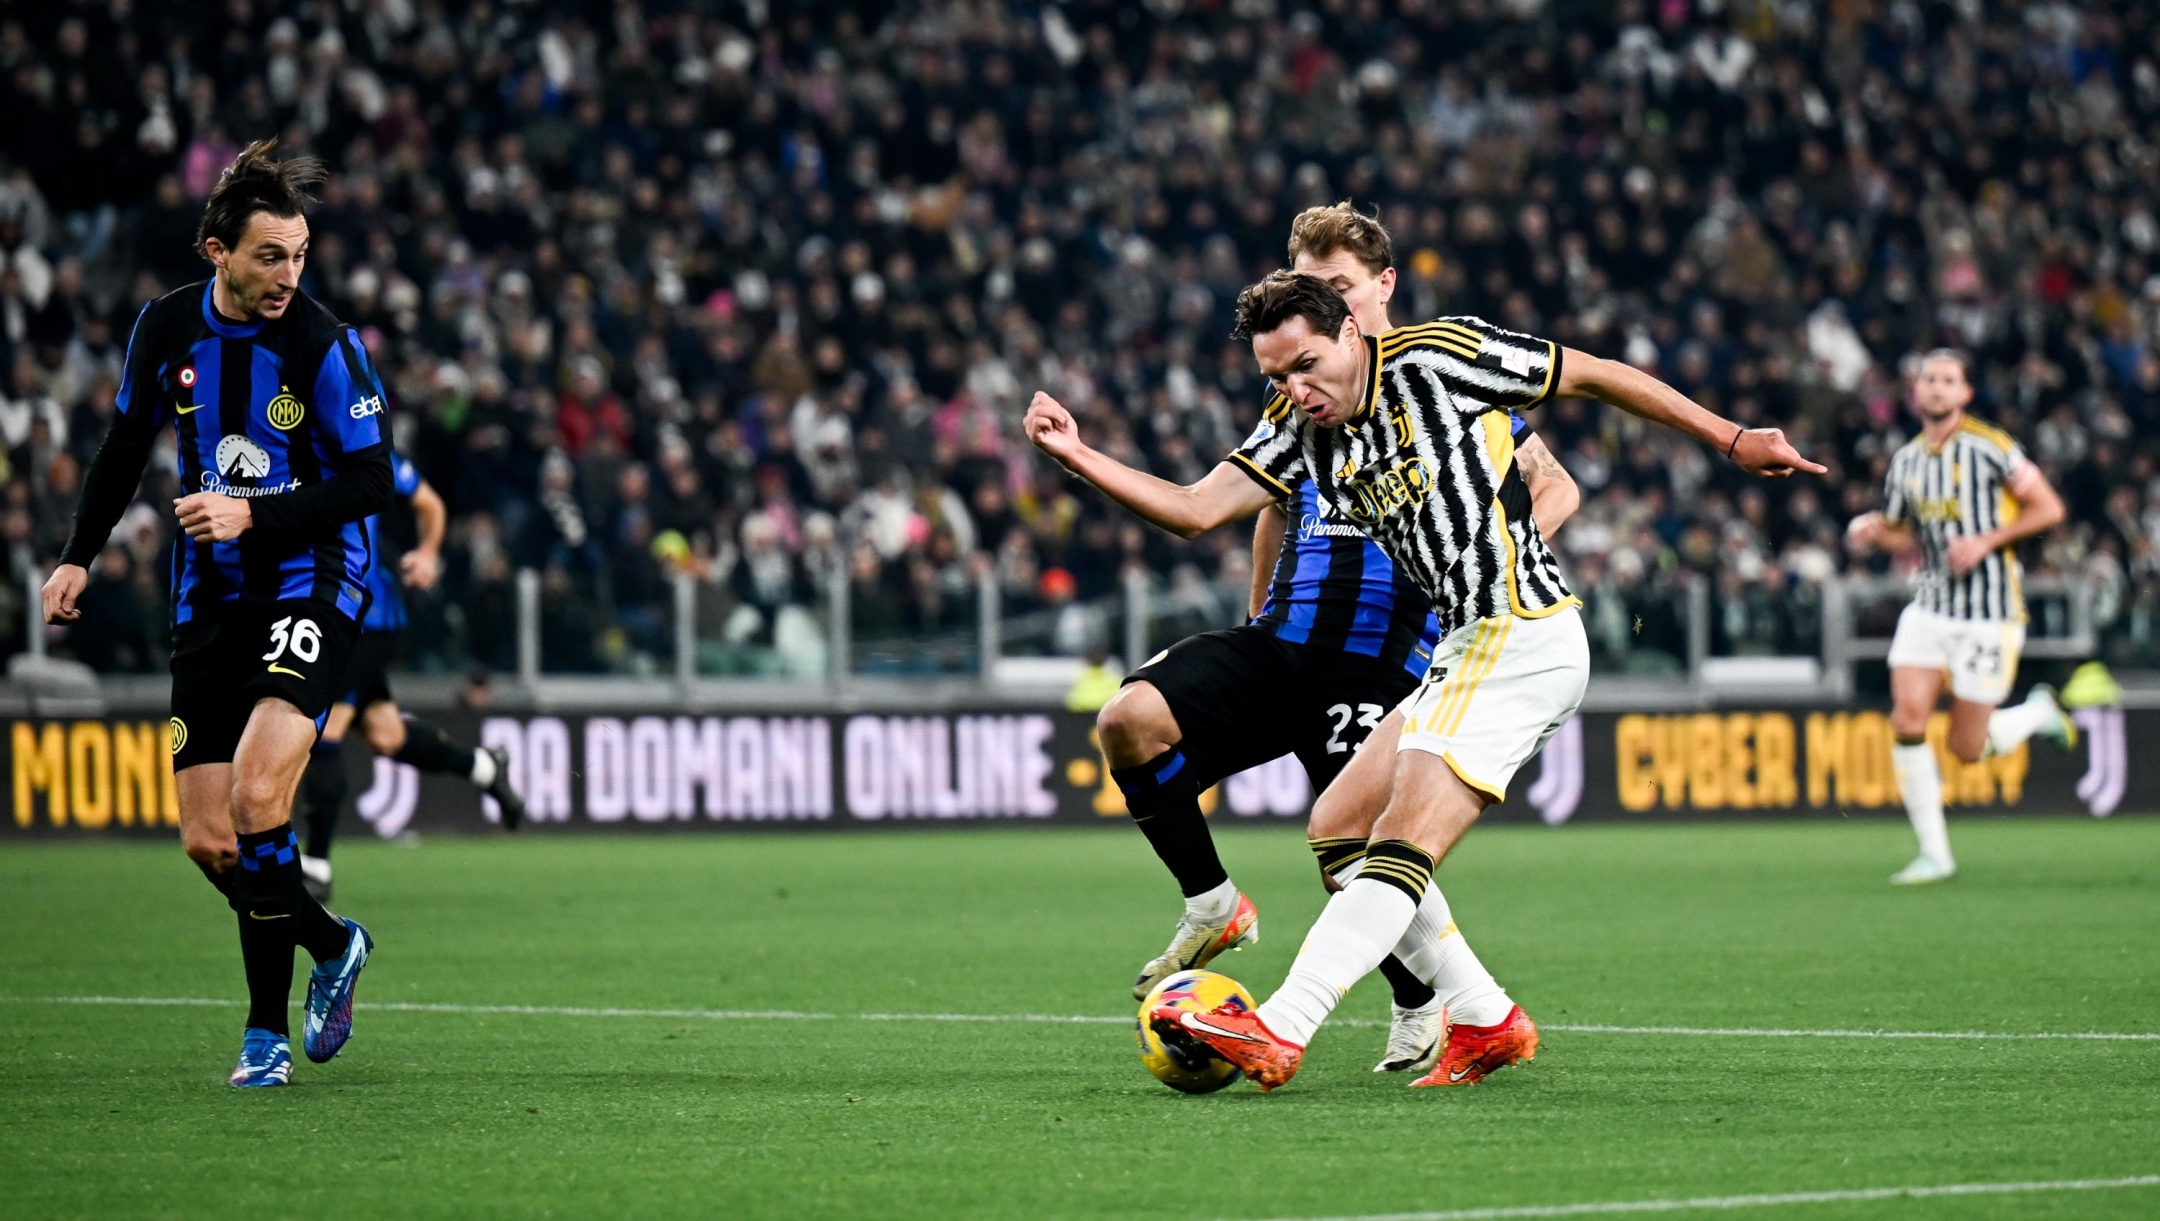 TURIN, ITALY - NOVEMBER 26: Federico Chiesa of Juventus makes an assist on his teammate Dusan Vlahovic who scores the goal during the Serie A TIM match between Juventus and FC Internazionale at Allianz Stadium on November 26, 2023 in Turin, Italy. (Photo by Daniele Badolato - Juventus FC/Juventus FC via Getty Images)